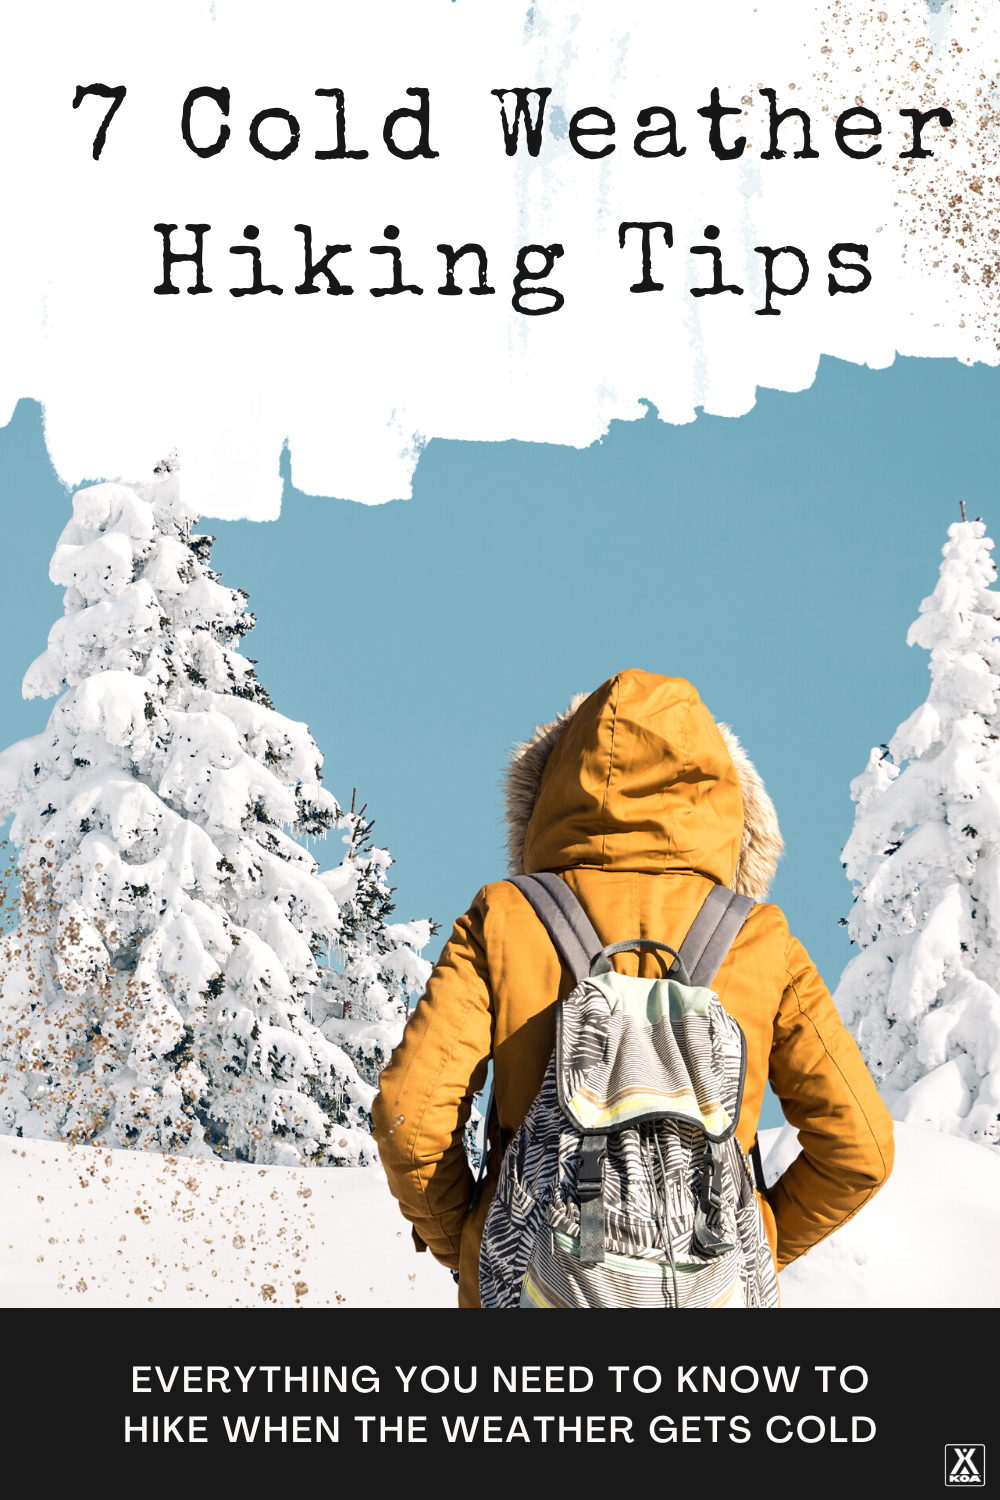 Just because it's cold outside doesn't mean you can't hike. Use these seven tips to make the most of cold weather hiking and enjoy the outdoors no matter the season.